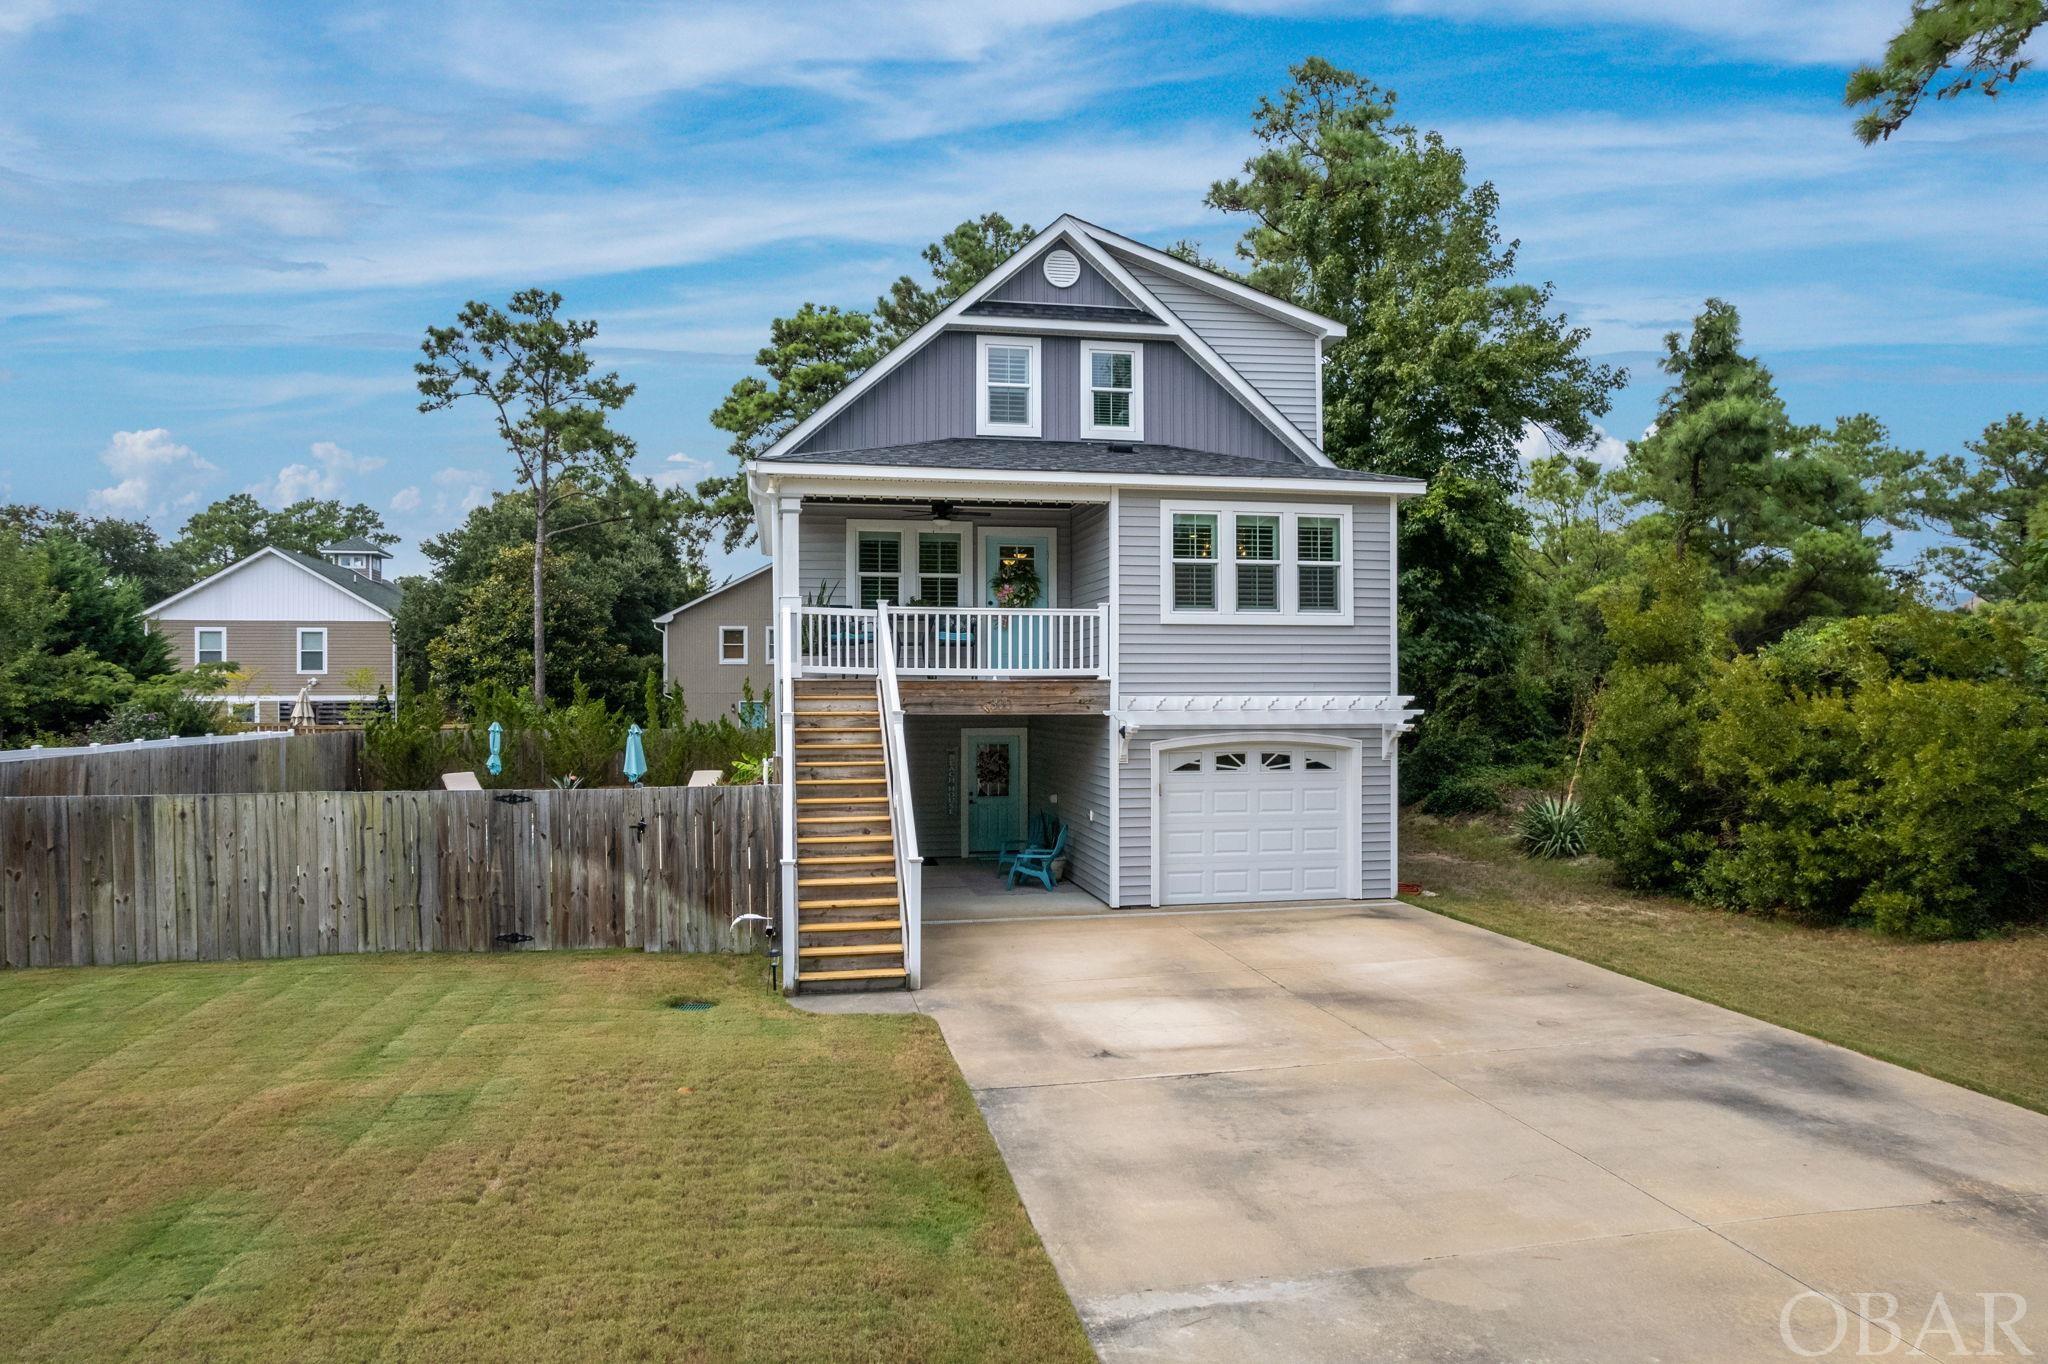 This modern, stylishly upscaled 4-bed, 3.5 bath saltbox is downright immaculate and is quite simply gonna knock your socks off! It's location just can't be beat - in the heart of Kill Devil Hills on a corner lot in an established westside neighborhood. You're close to, well, just about everything the Outer Banks is known for, and most within walking distance - great restaurants, shopping opportunites and attractions, even the maritime forests of Nags Heads Woods Preserve! Let's start with the outdoor living here. It's off the charts! In-ground gunnite saltwater pool, hot tub w/sound system on paver patio shaded by a pergola, covered tiki bar with lots of seating and sun-drenched patio seating, all near the pool. Plus, it's all surrounded by a privacy fence bordered with lush landscaping and plenty of yard. You and your guests will have a blast! Entering the home from the covered patio/tiki bar, you're welcomed by an inviting functional mudroom with a sitting bench and plenty of storage options. On this floor, you'll also find a spacious bedroom (owners are uitilizing as an office) en-suite with double sinks and storage built-ins. The attached one-car garage is tiled and has built-in cabinets to store all your pool and beach accessories. As you move up to the main level of the house, it just keeps getting better! Beautiful hardwood floors and custom plantation shutters frame the open-concept living area lending a cozy, but distinctive airiness combined with the soaring cathedral ceilings. The stylish kitchen with  generous-sized prep island, stainless steel appliances, smooth quartz countertops, large apron-front stainless sink, pantry and gorgeous tiled backsplash will satisfy even the most discerning of chefs and is completely open to the adjacent dining room. Down the hall is a serene master en-suite, complete with double sinks, custom-tiled shower, built-in open shelving and access to a walk-in closet and very functional laundry room with storage cabinets and hanging rod. On the top level are two more spacious bedrooms flanking a full-sized Jack-and-Jill bath, all beautifully updated. This home is truly amazing and absolutely turn-key! Don't miss out! Book your showing today!